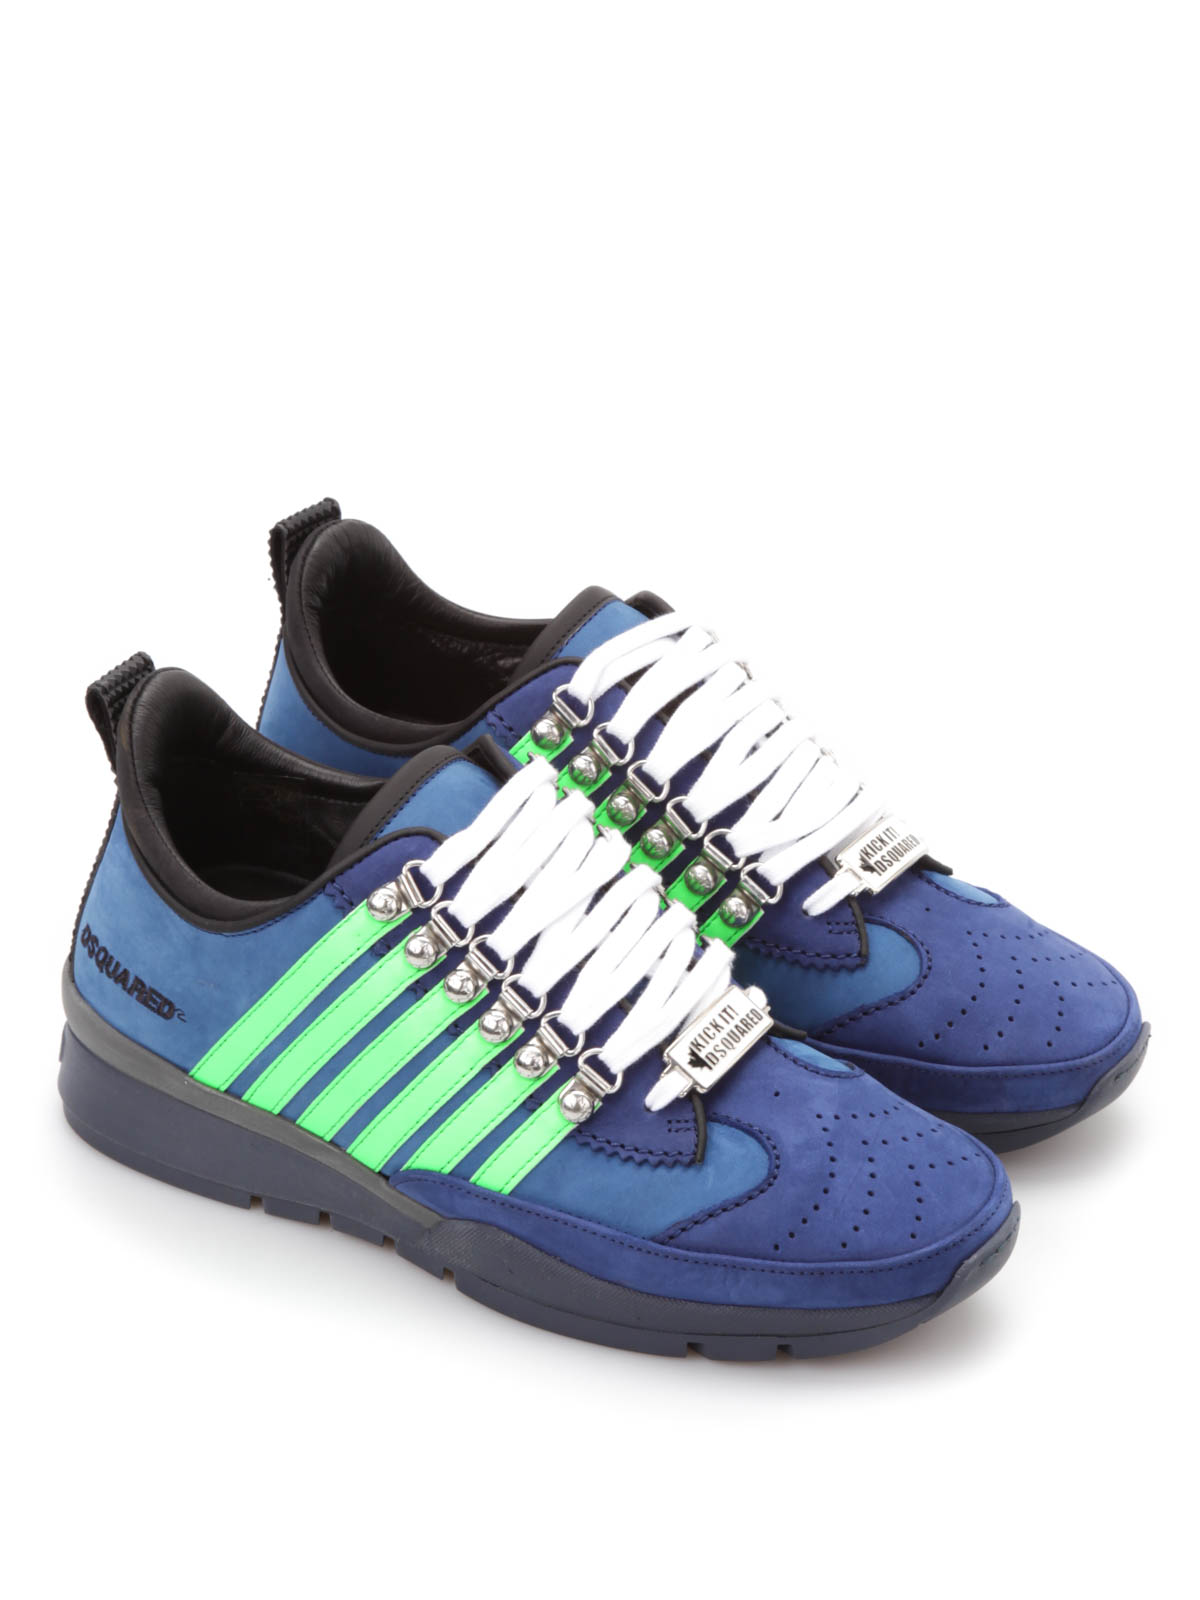 Trainers Dsquared2 - Sneakers 251 - W15SN101097M650 | Shop online 